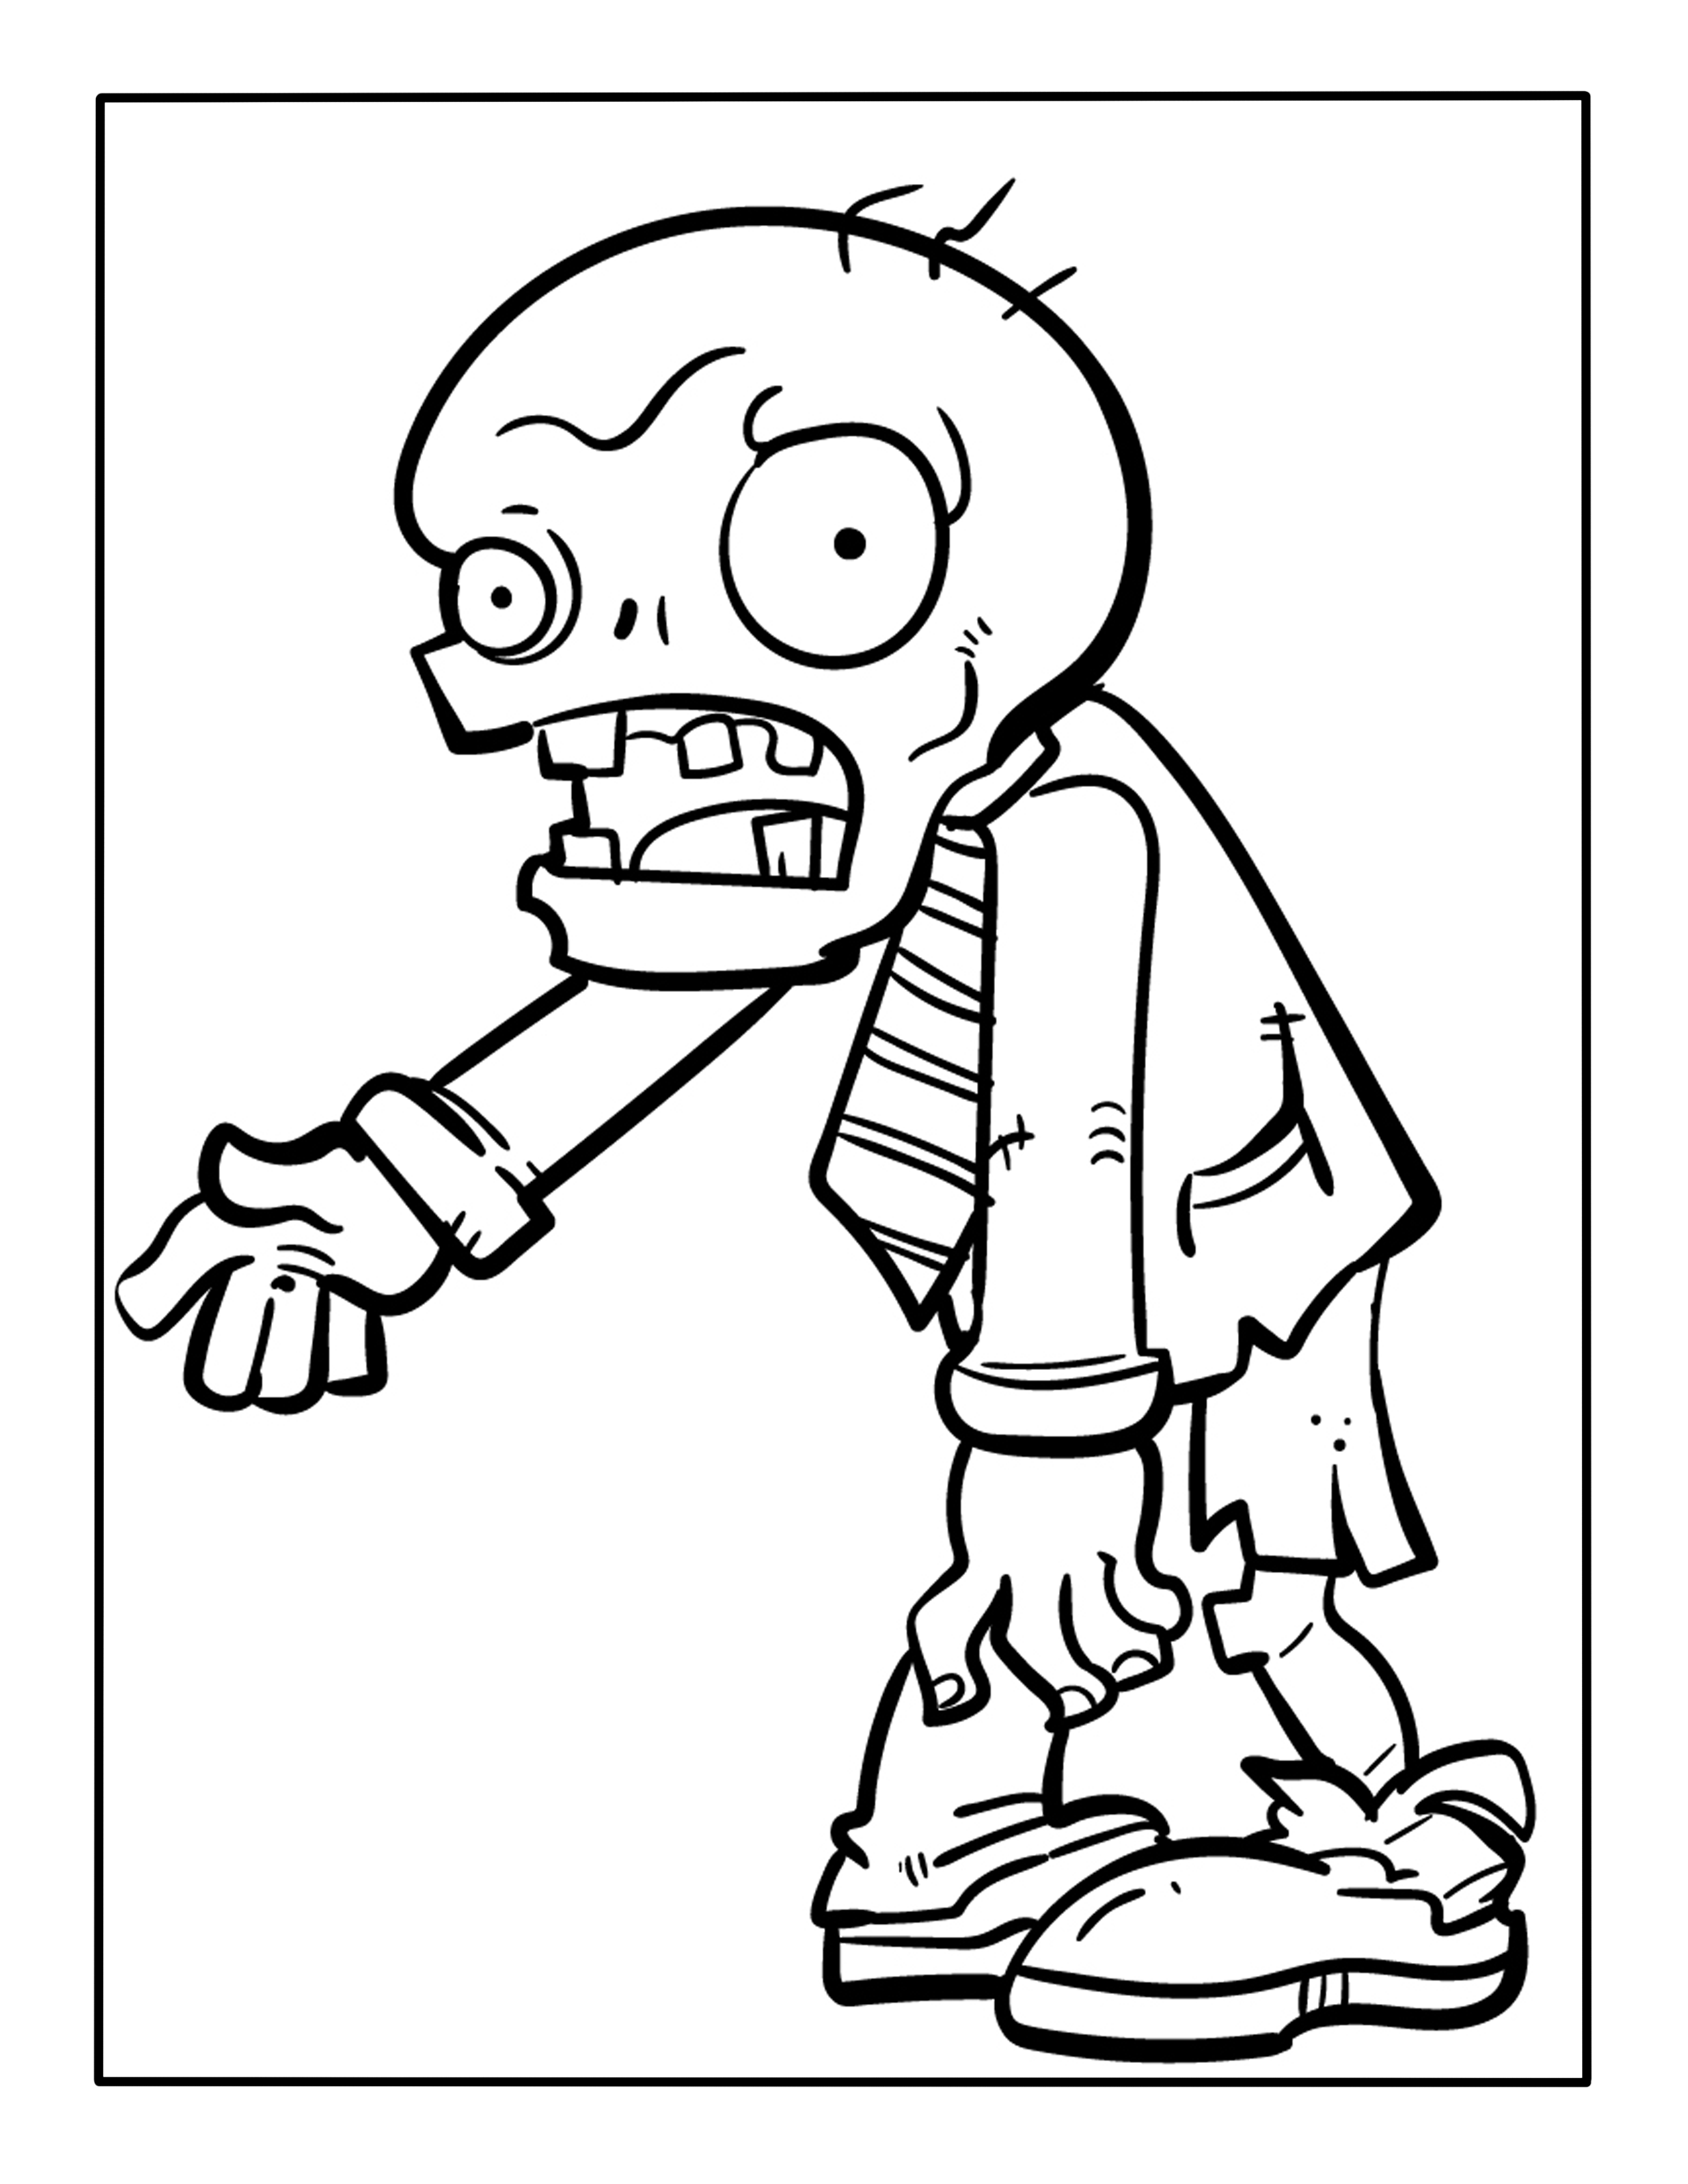 Zombie Coloring Page – Kimmi The Clown